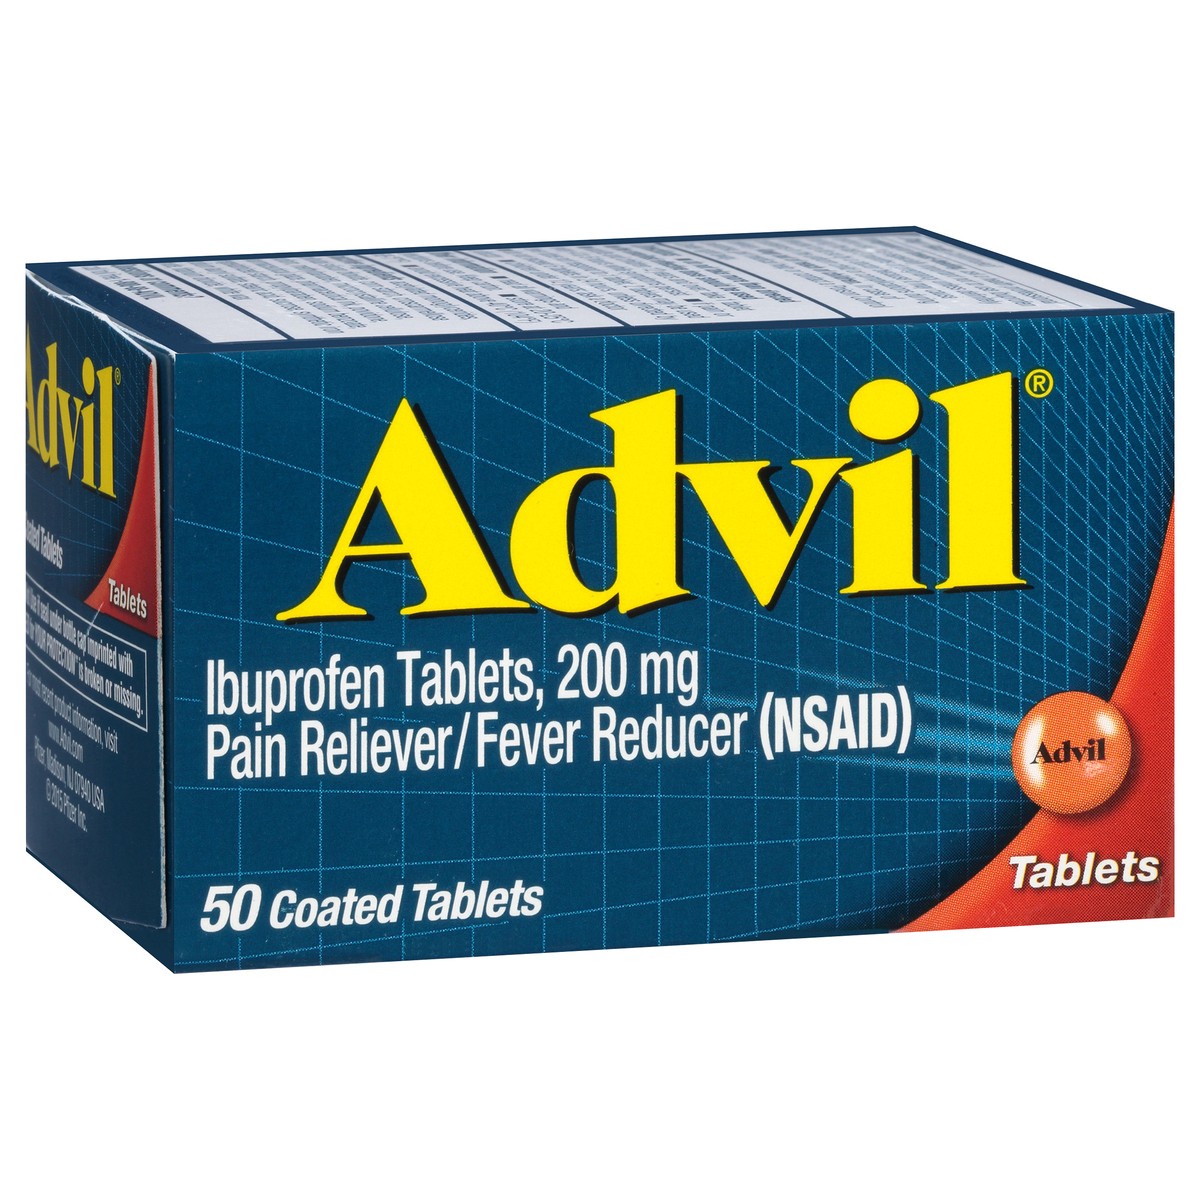 slide 2 of 8, Advil Pain And Fever Reducer Tablets - Ibuprofen (NSAID), 50 ct